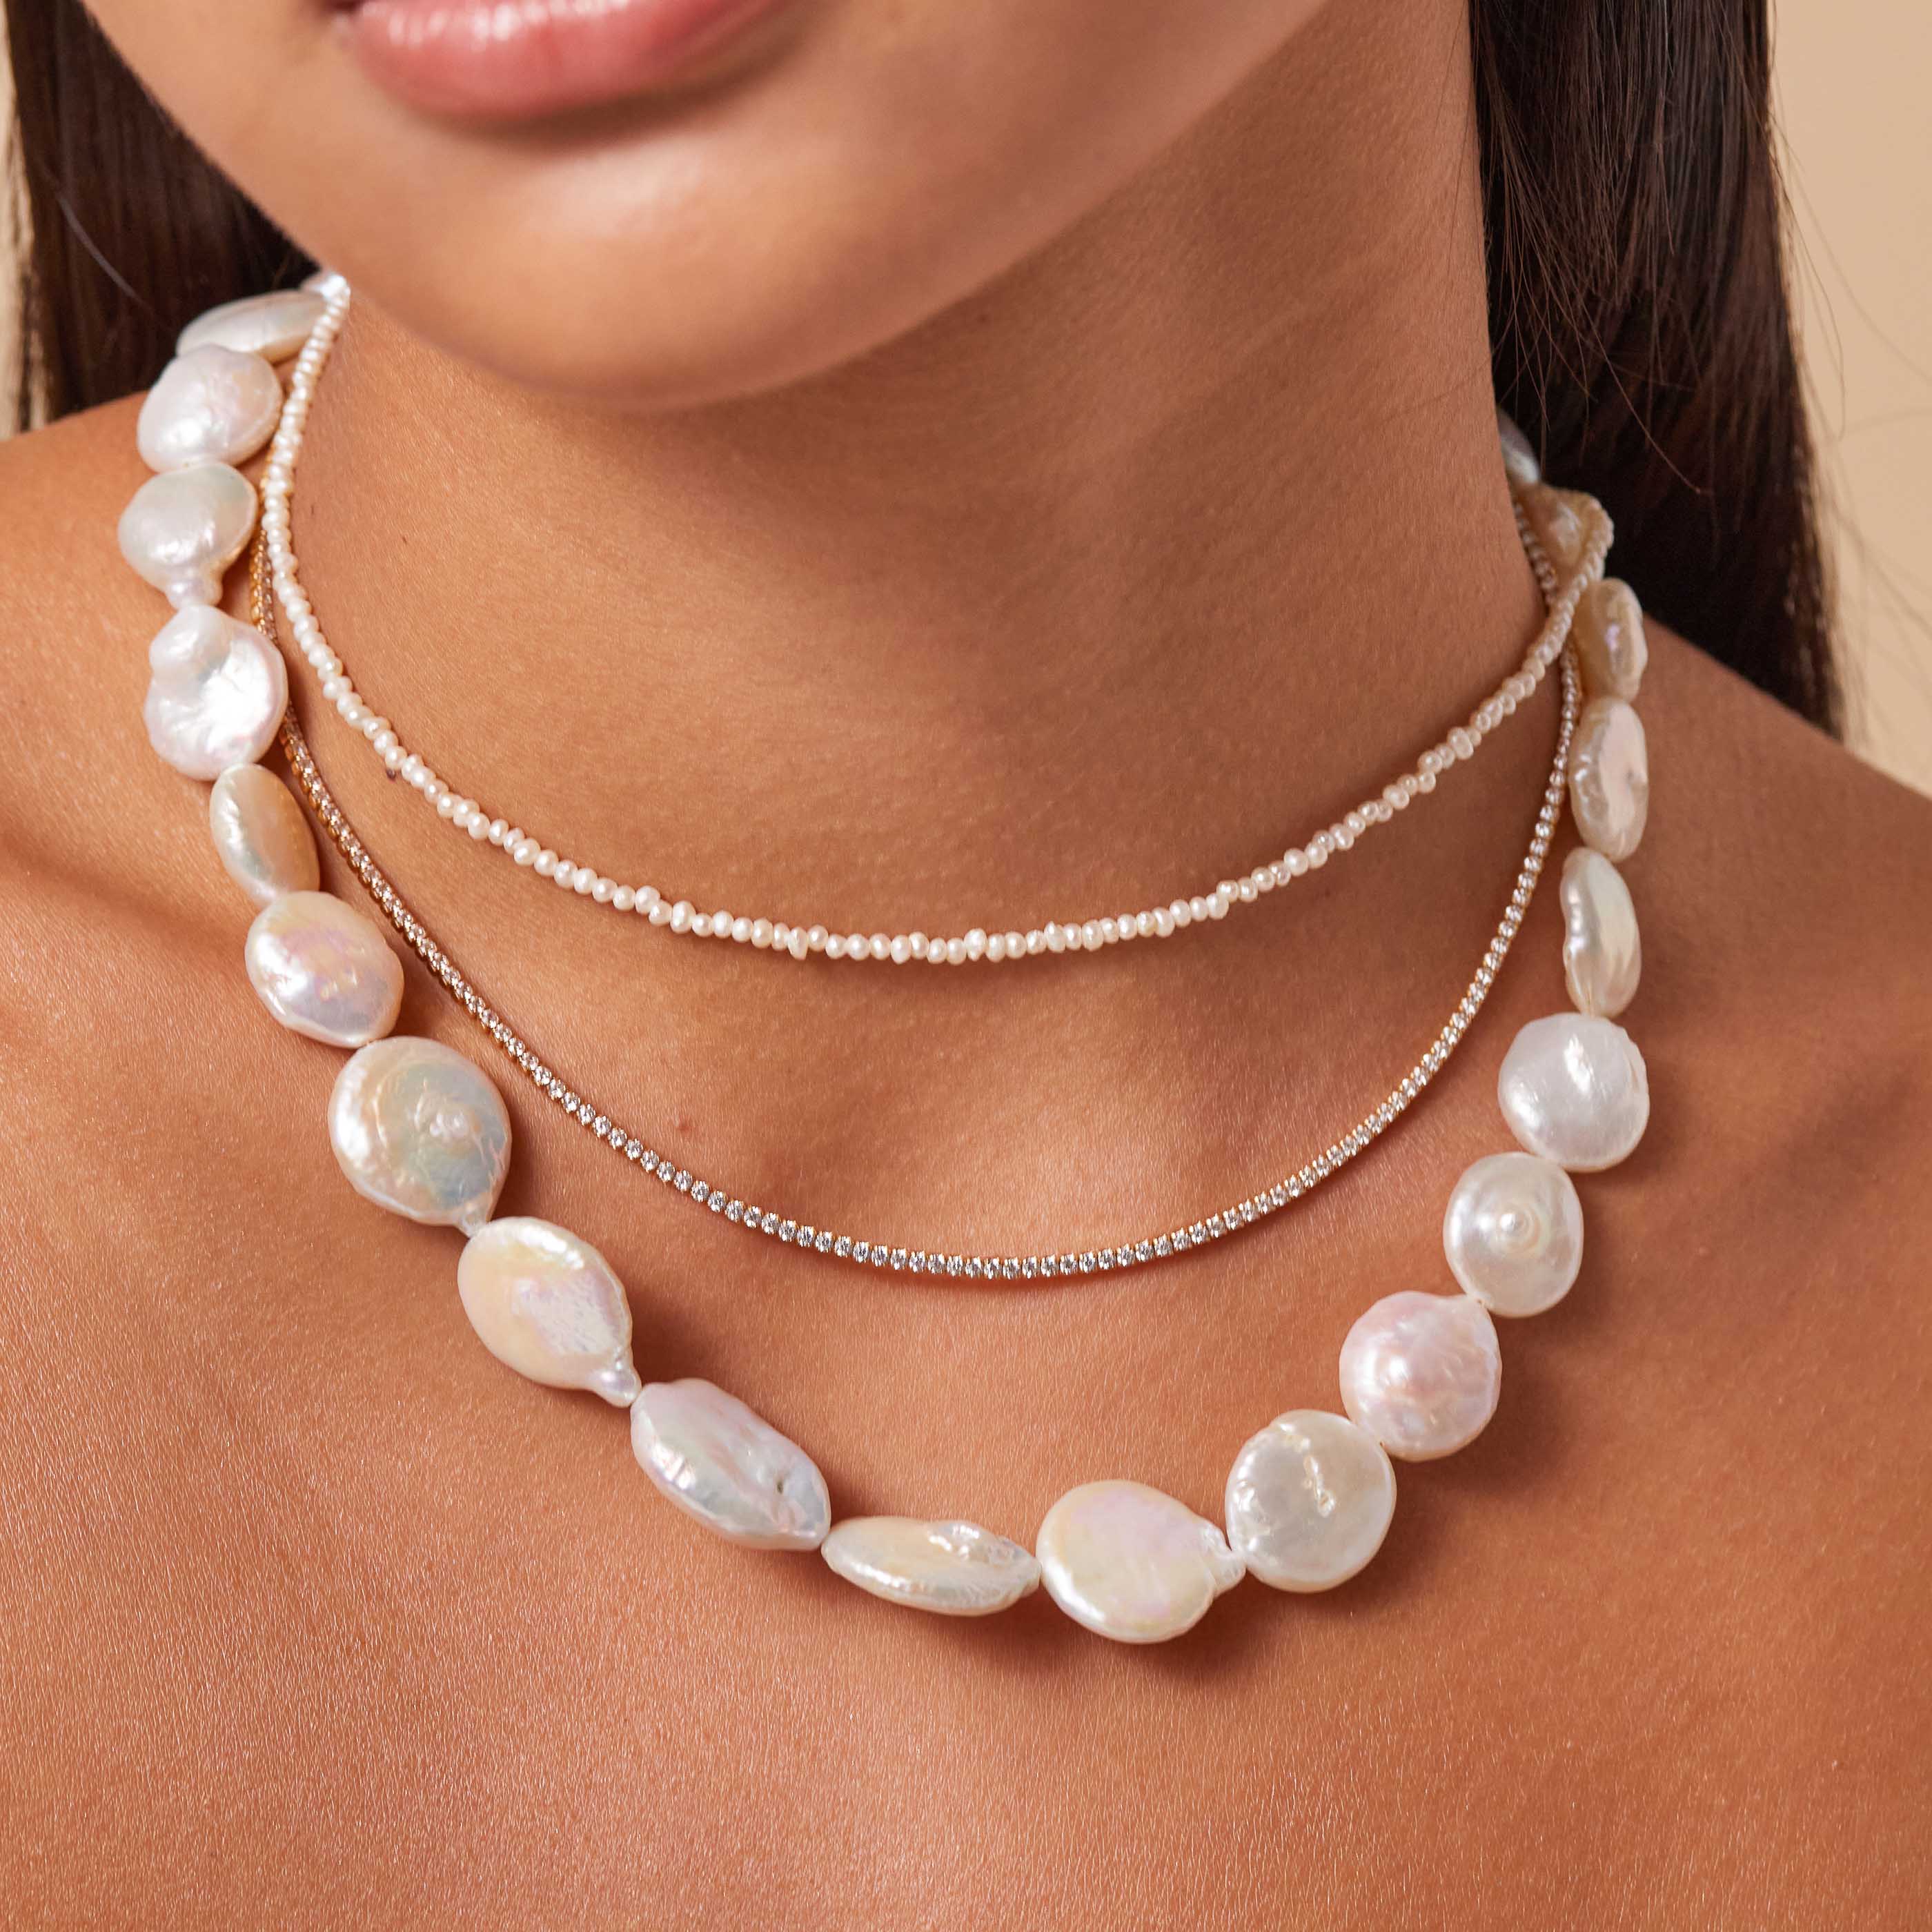 Opulent Pearl Necklace in Gold worn layered with necklaces